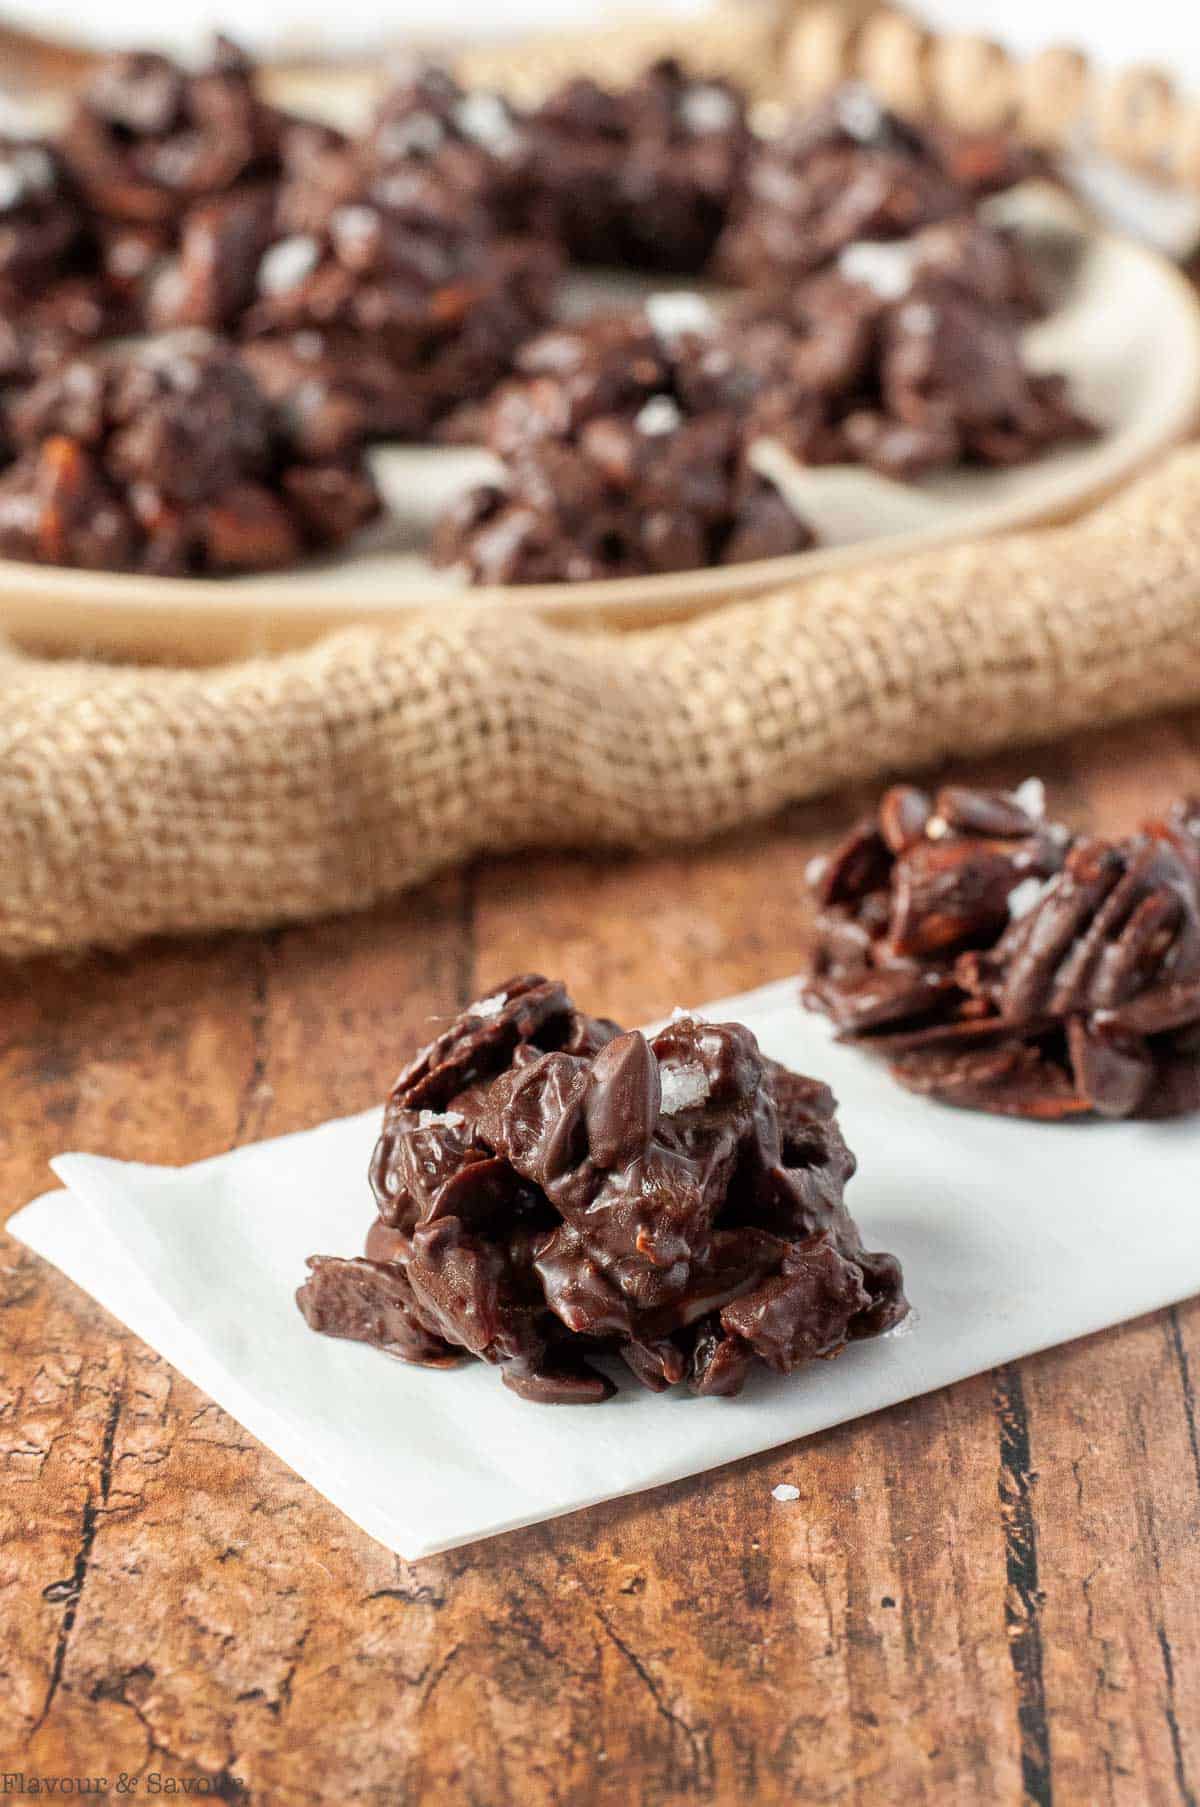 Trail mix chocolate nut clusters with dried fruit.